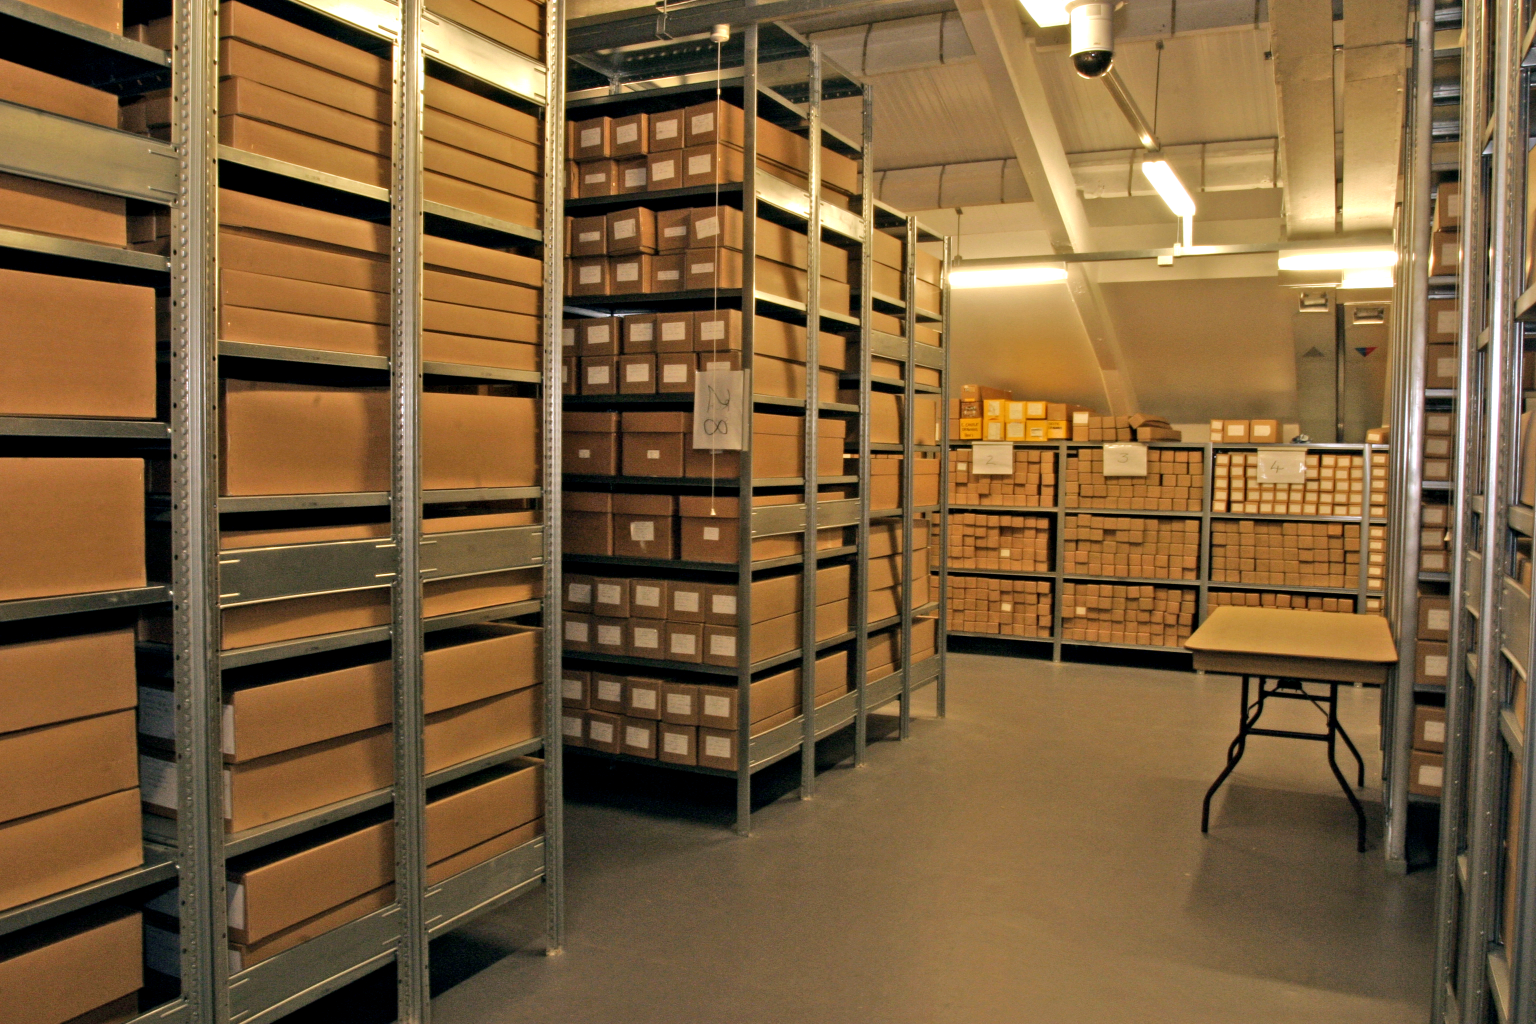 Over 1 million drawings stored here at National Railway Museum